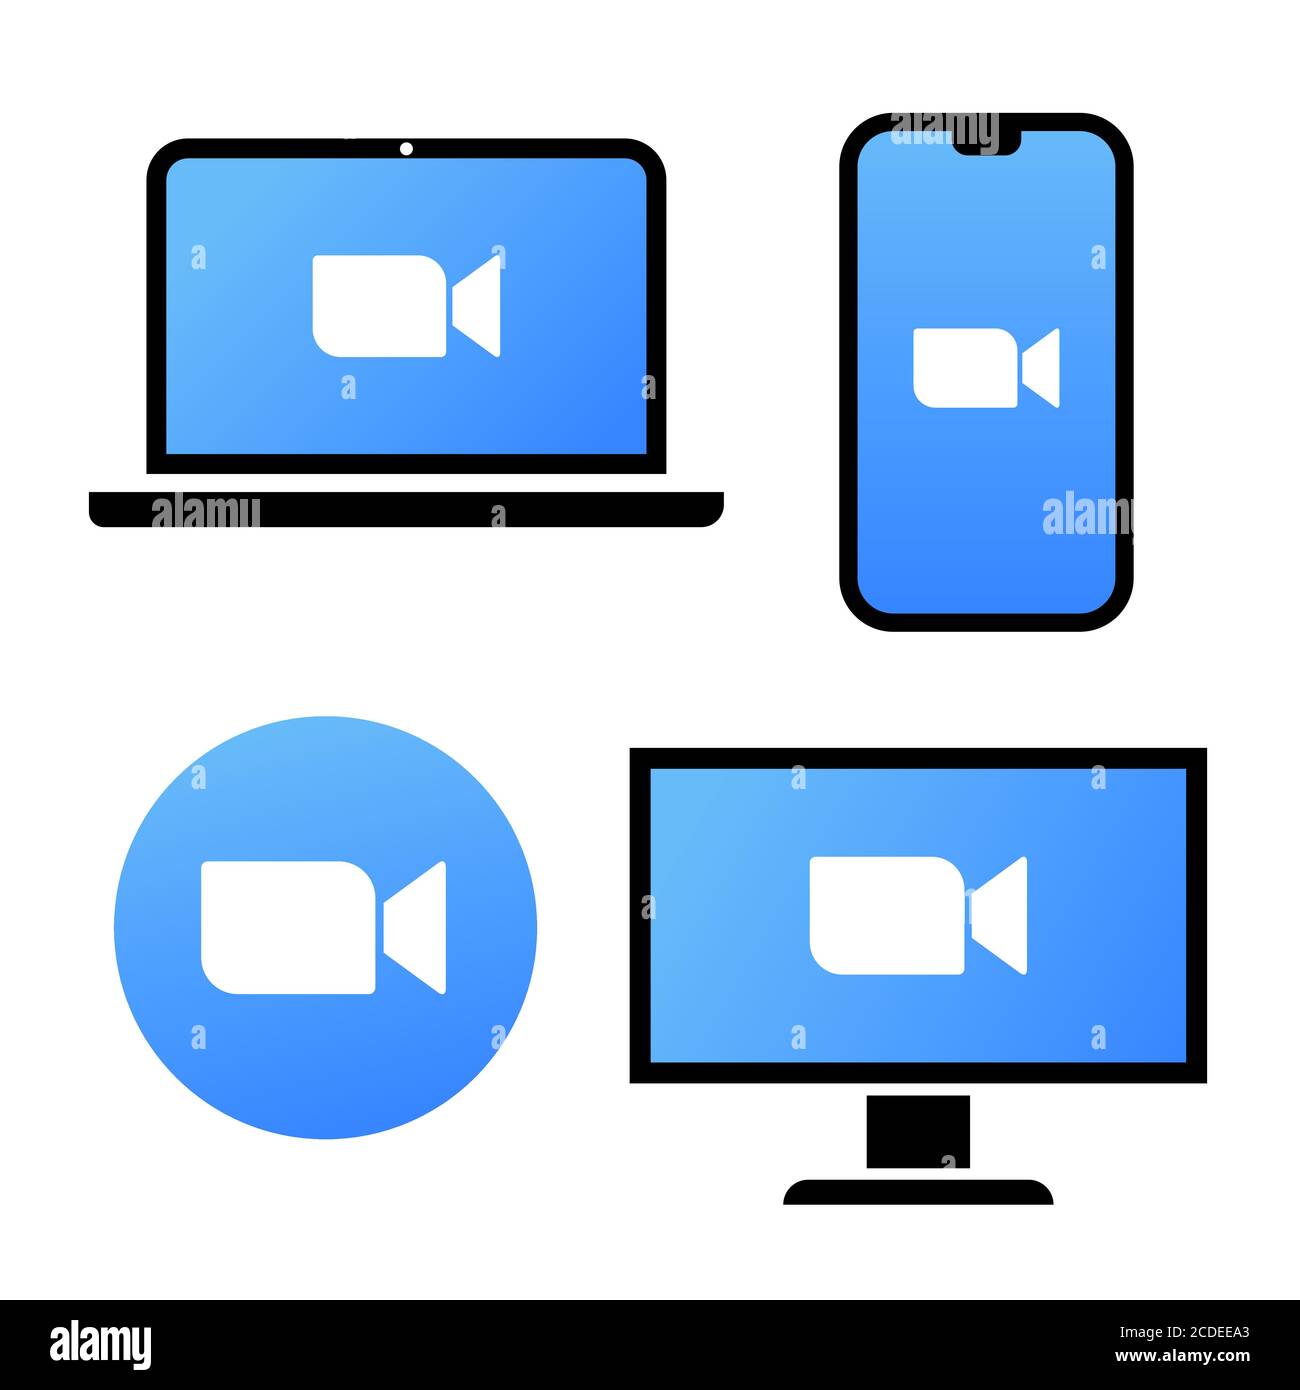 Blue camera icon - Live media streaming application on different devices - laptop, smartphone, tv, tablet, monitor, conference video calls with Stock Vector